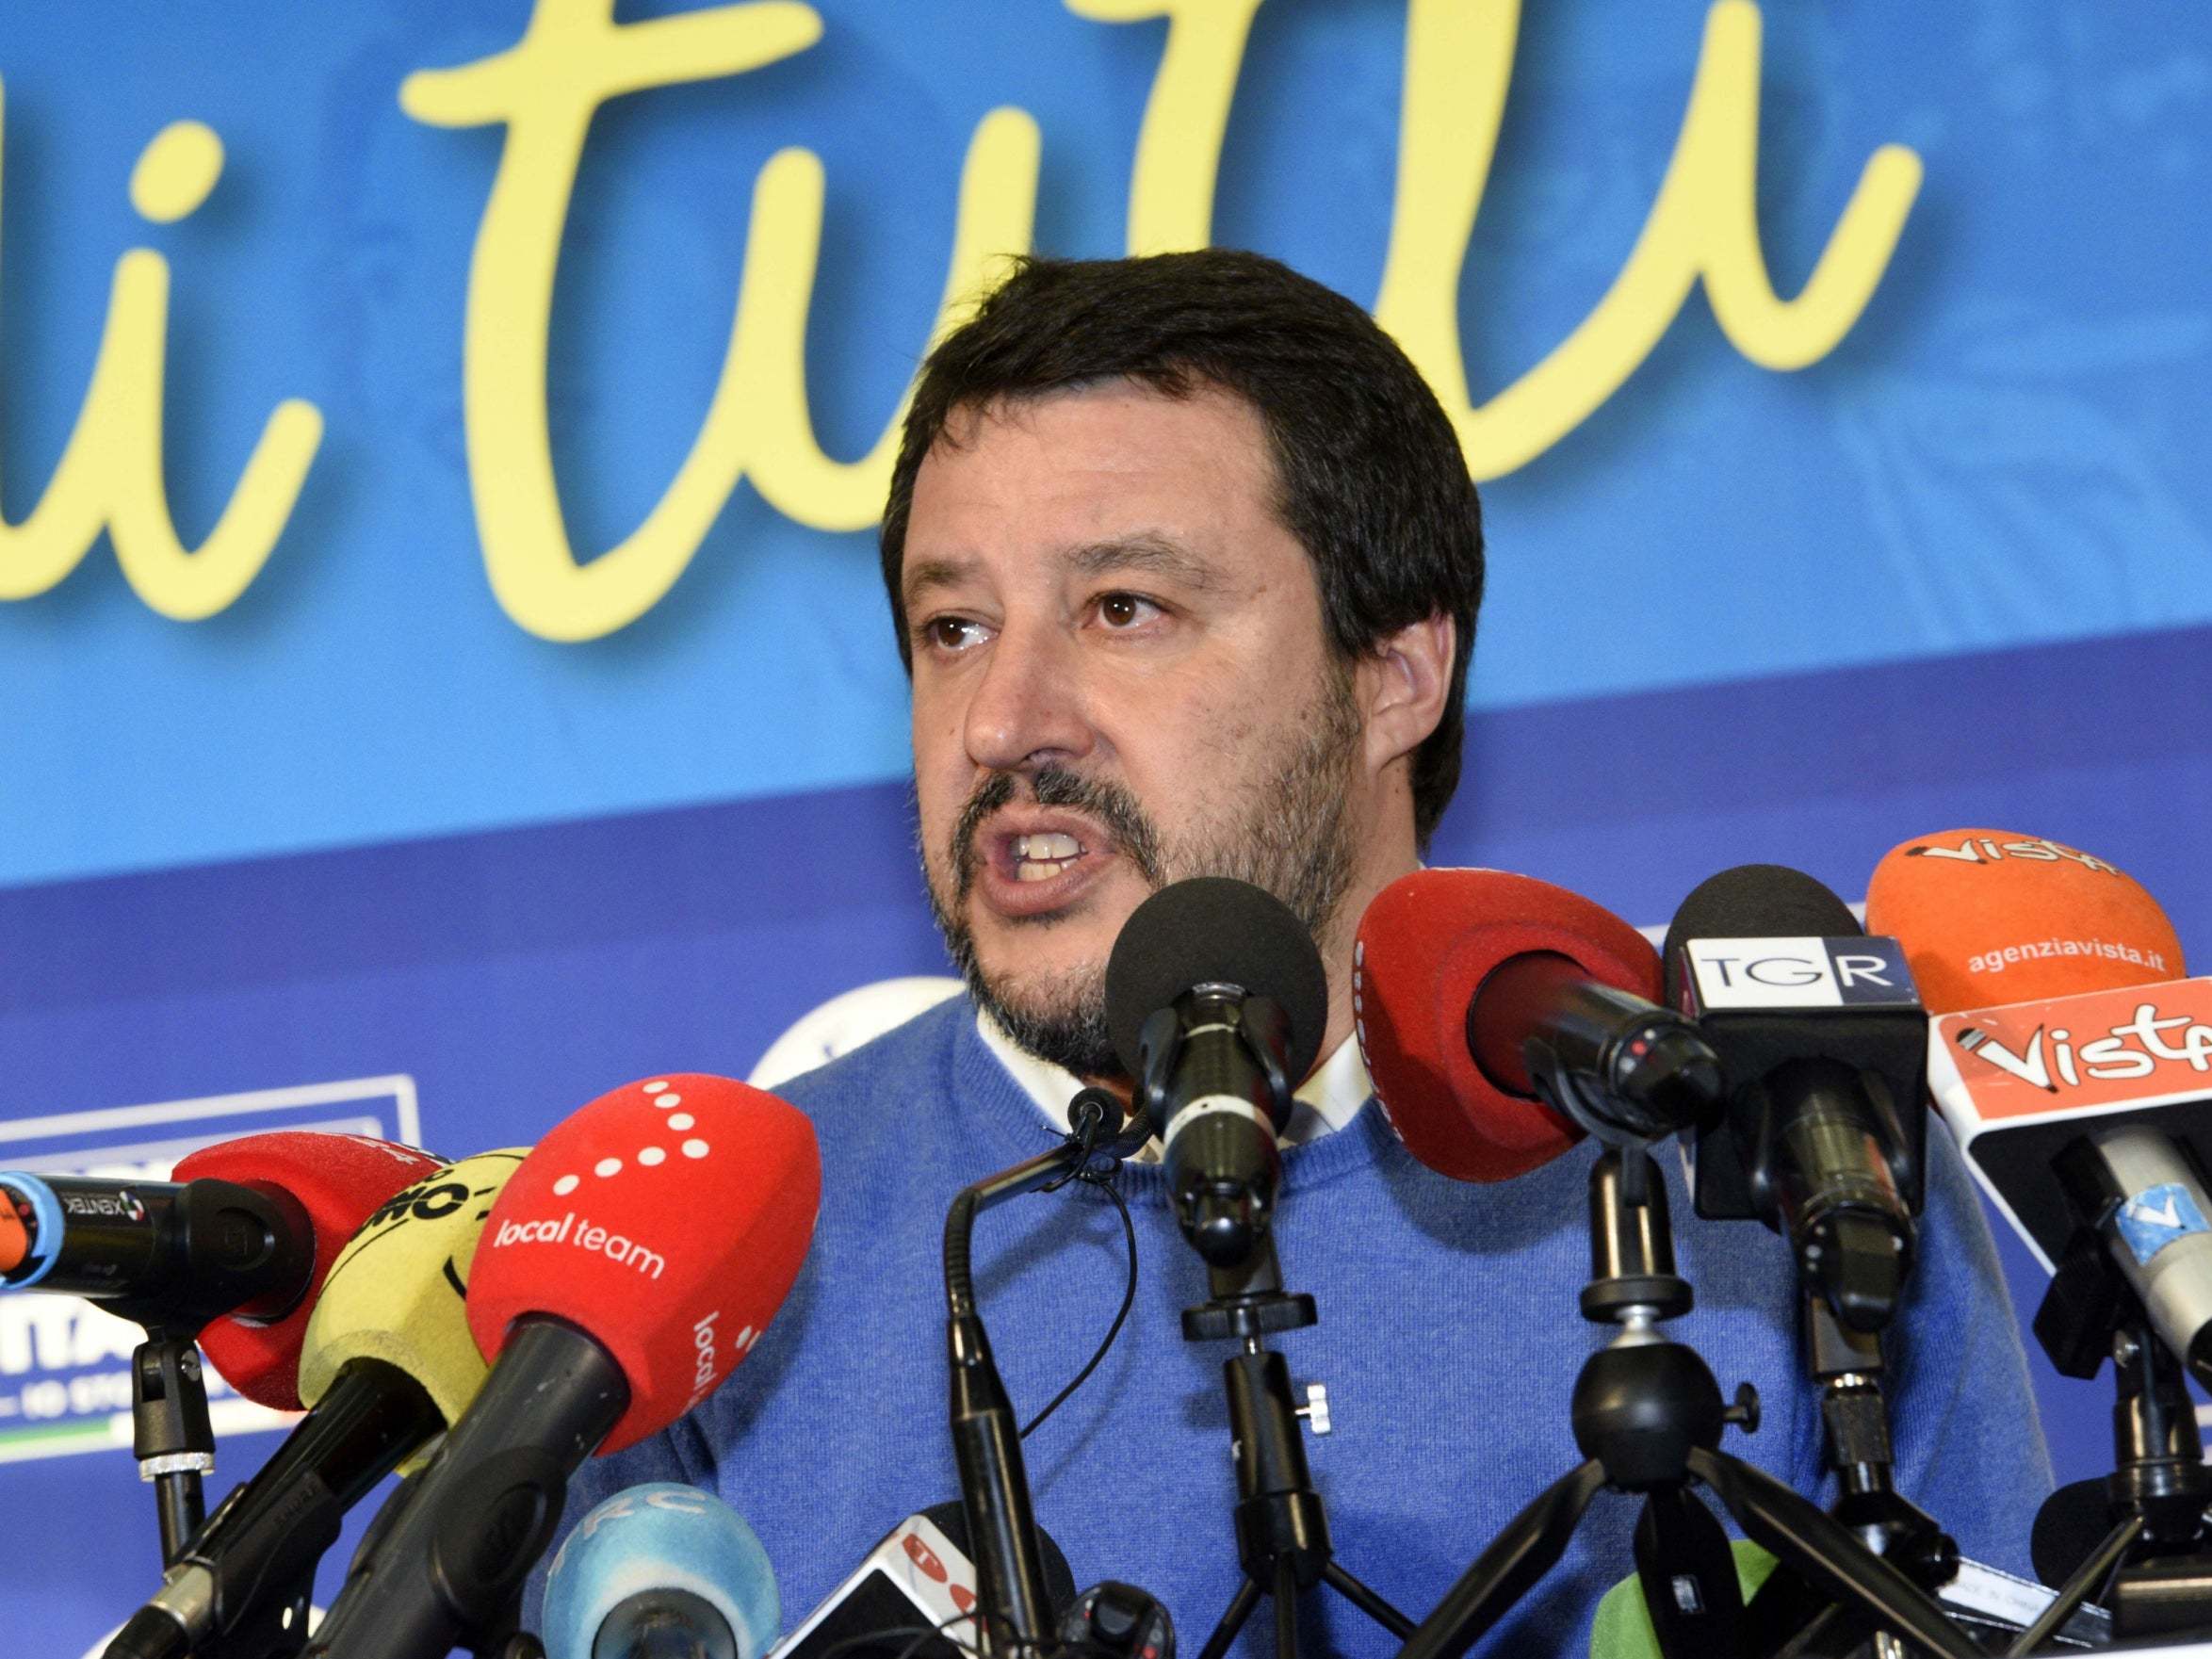 Far-right leader Matteo Salvini defended the mountaineers